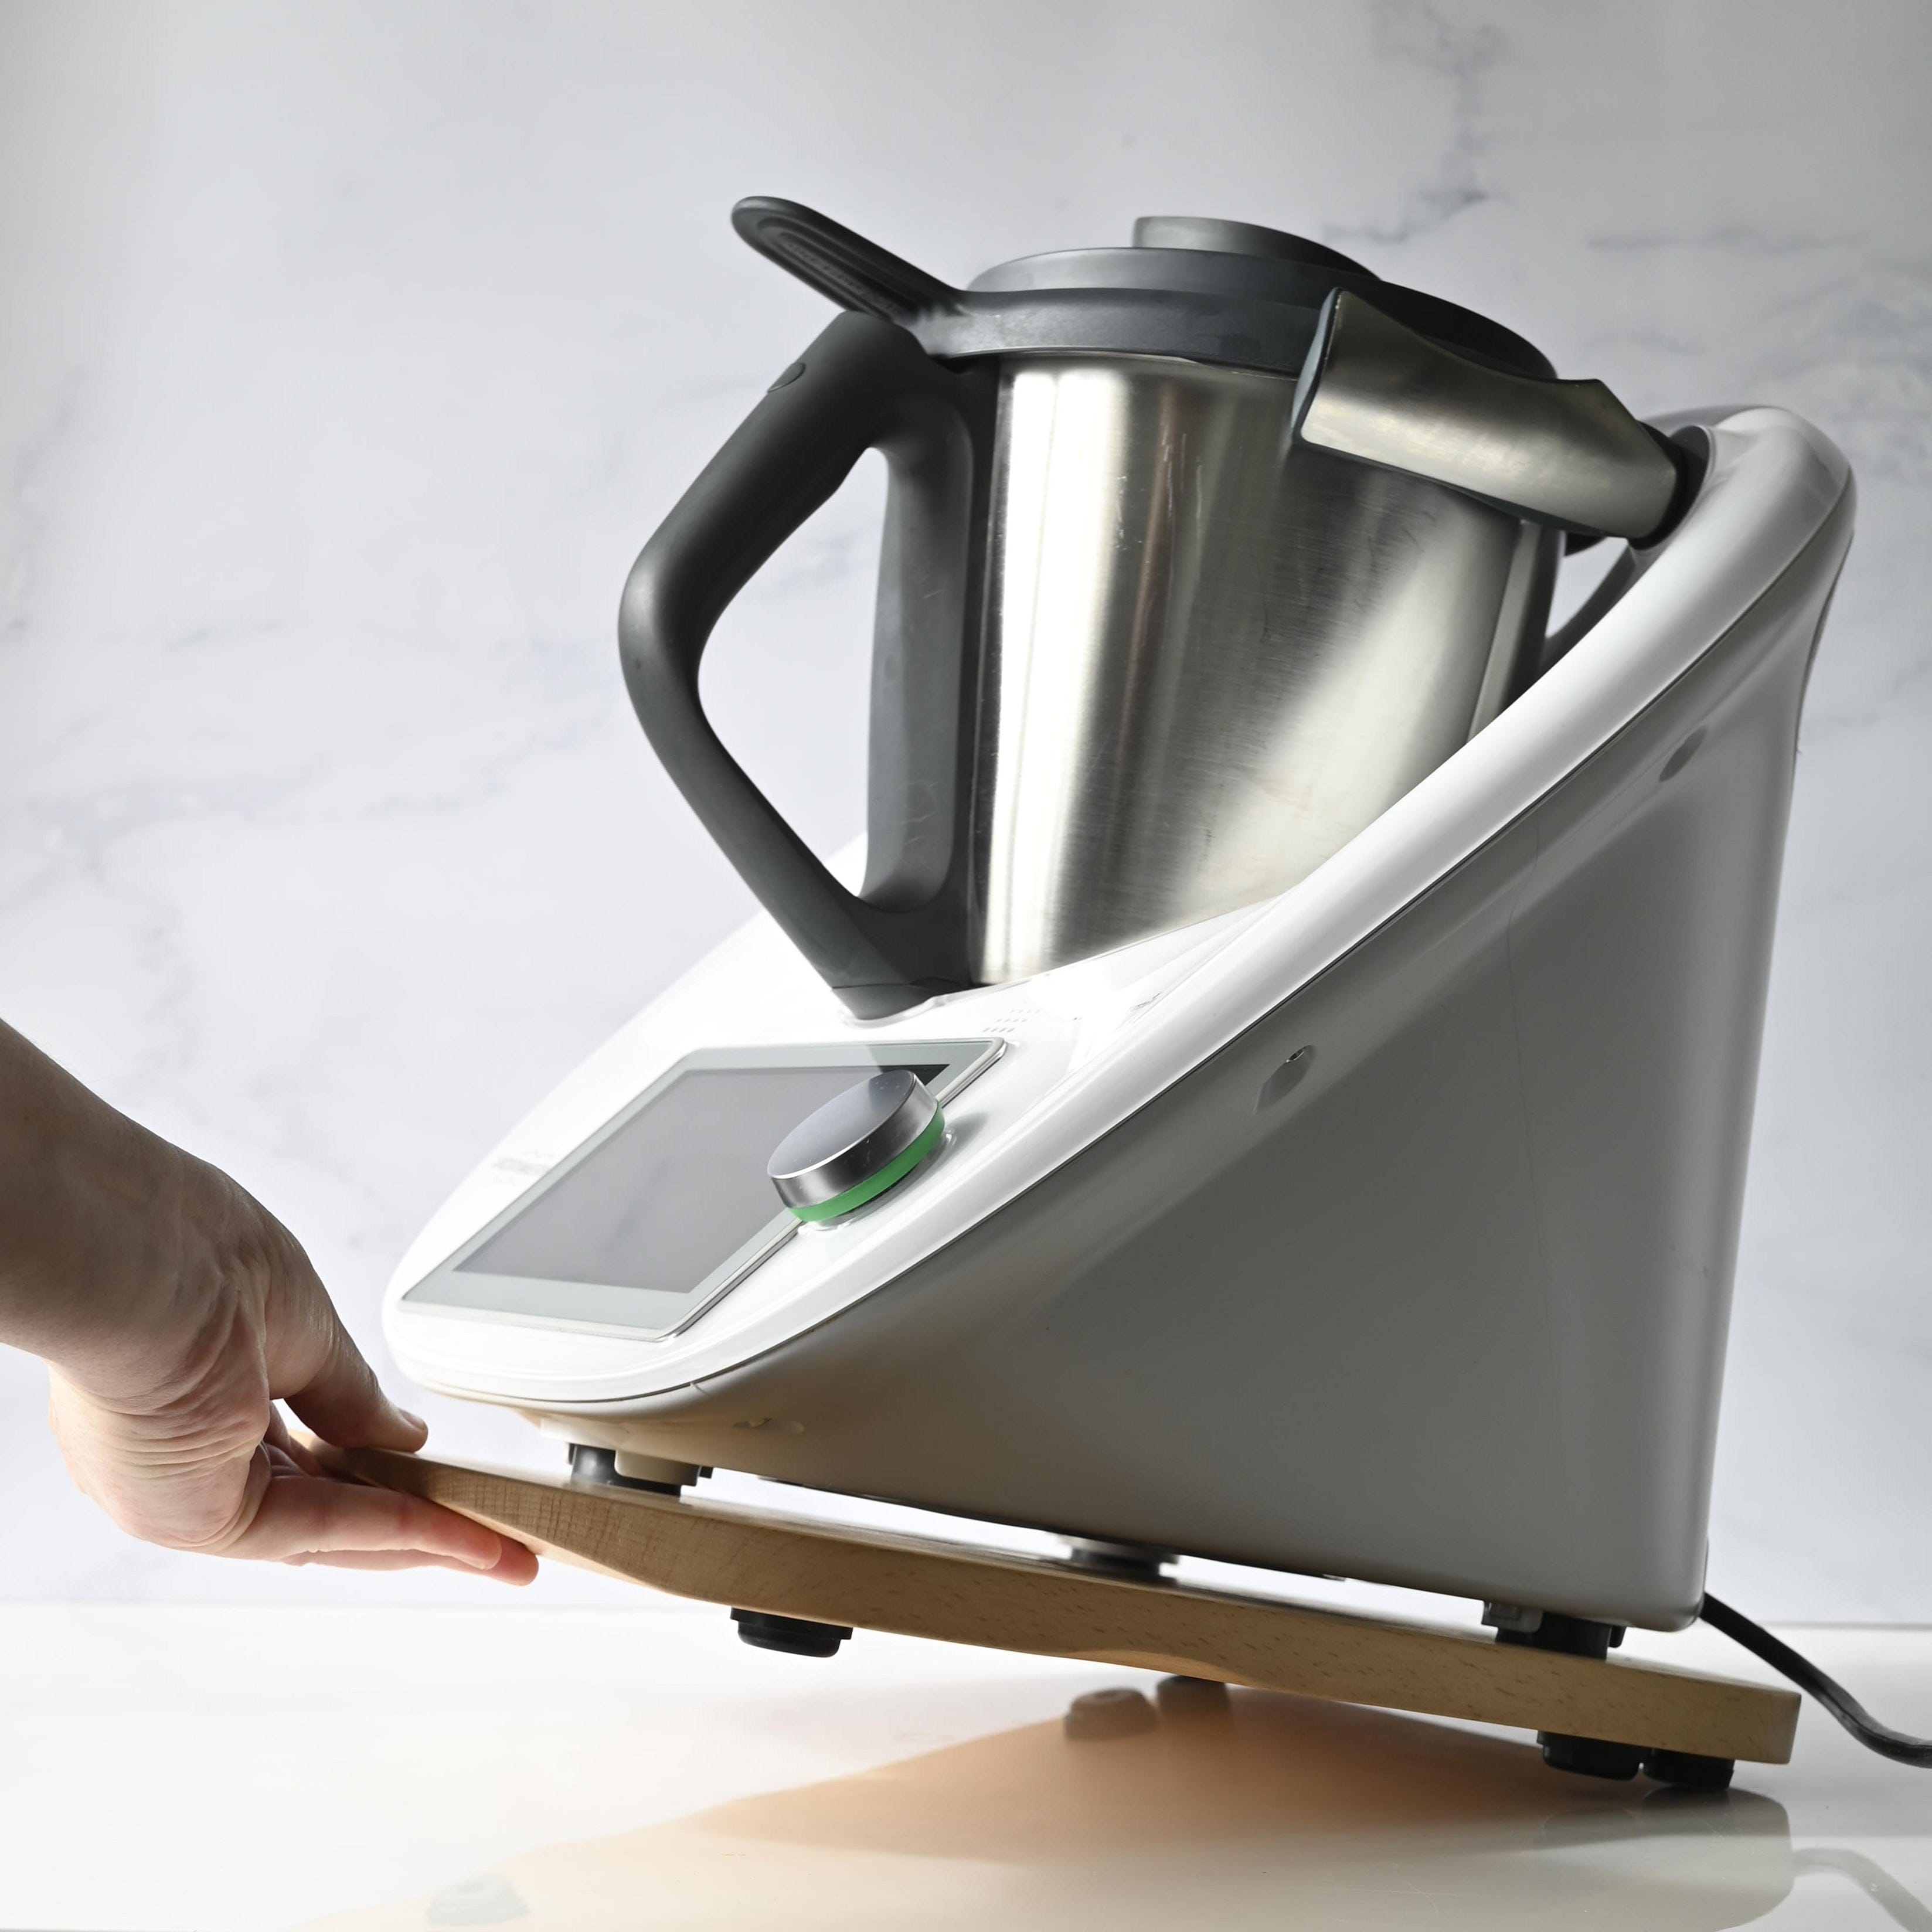 Thermomix slider Archives - One Girl and her Thermie